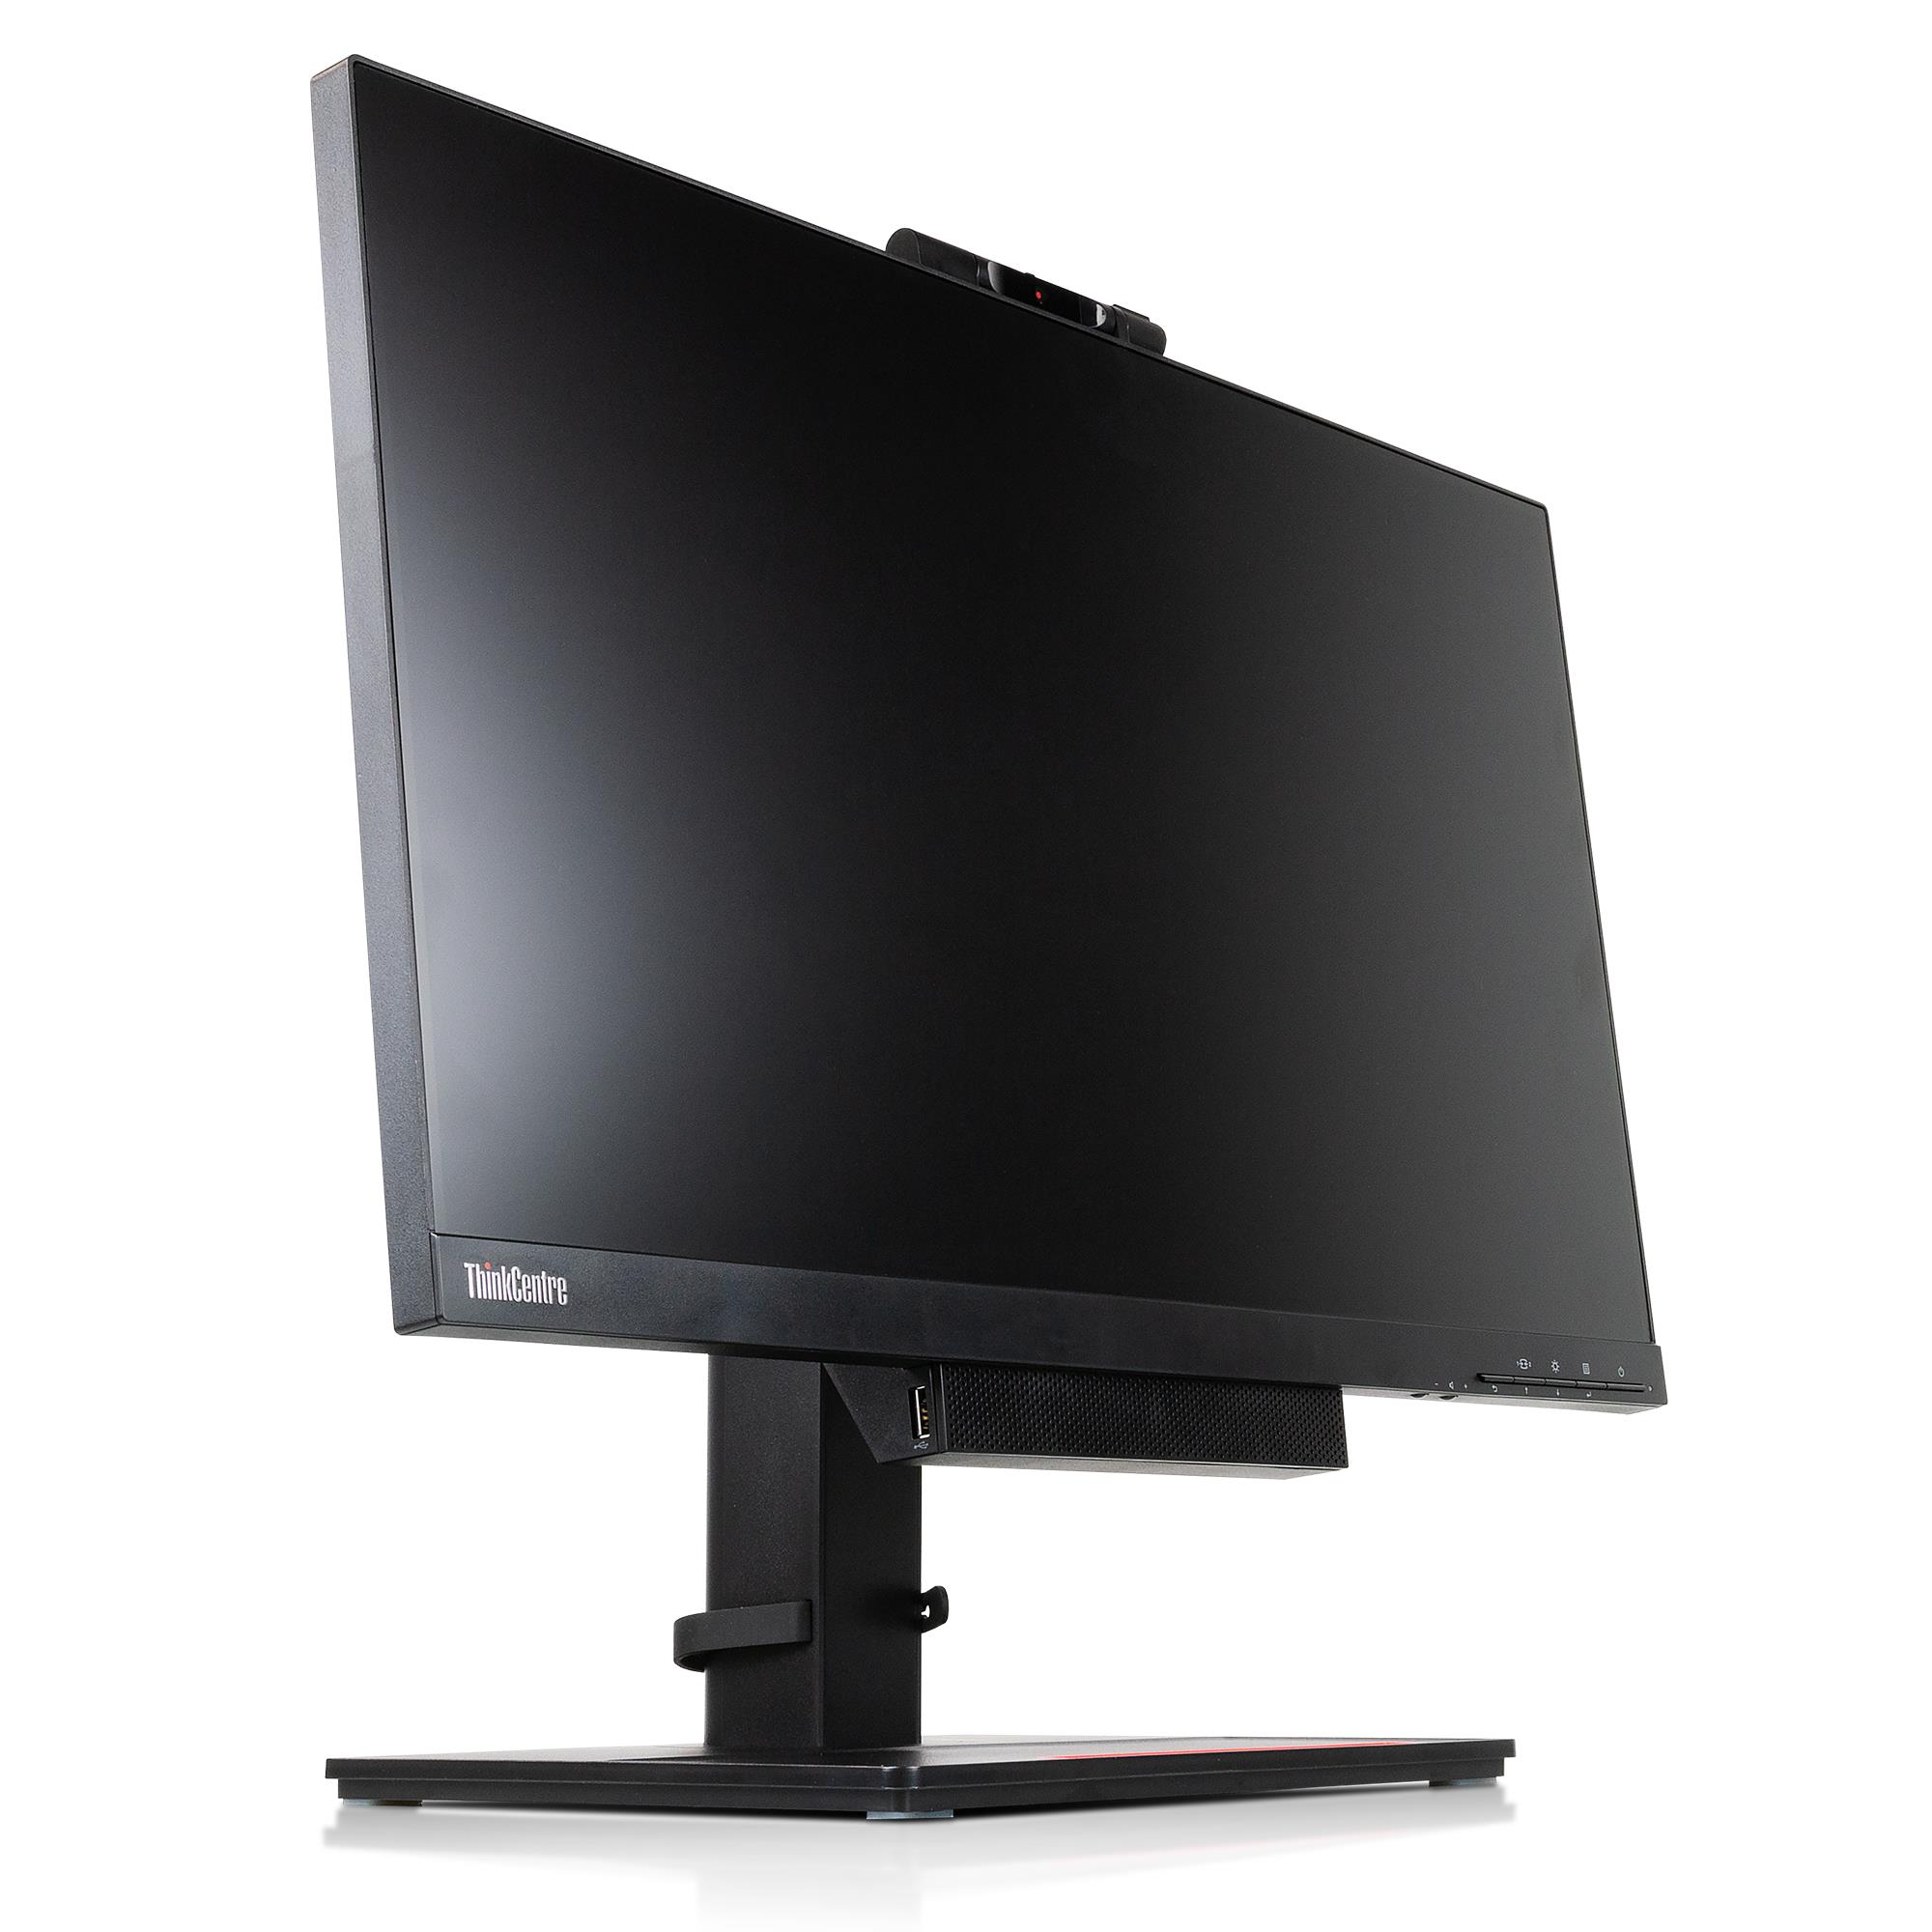 LENOVO REFURBISHED (*) ThinkCentre Tiny-in-One 24 Zoll Full-HD TFT-Monitor ms (14 Gen4 Reaktionszeit ) 23,80